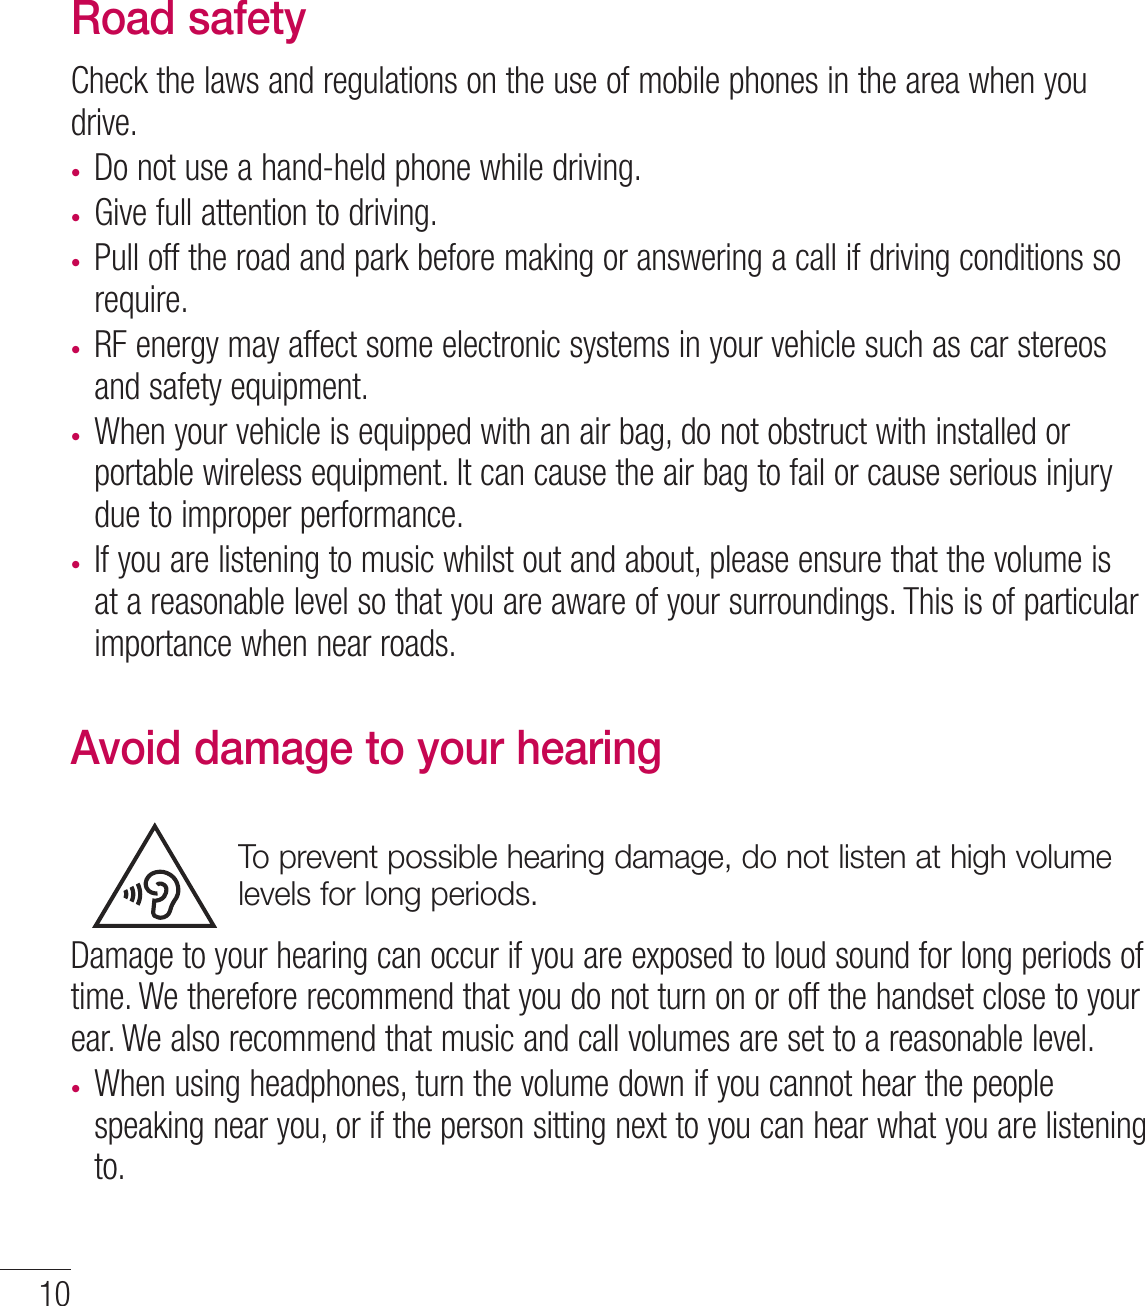 10Road safetyCheck the laws and regulations on the use of mobile phones in the area when you drive.t Do not use a hand-held phone while driving.t Give full attention to driving.t Pull off the road and park before making or answering a call if driving conditions so require.t RF energy may affect some electronic systems in your vehicle such as car stereos and safety equipment.t When your vehicle is equipped with an air bag, do not obstruct with installed or portable wireless equipment. It can cause the air bag to fail or cause serious injury due to improper performance.t If you are listening to music whilst out and about, please ensure that the volume is at a reasonable level so that you are aware of your surroundings. This is of particular importance when near roads.Avoid damage to your hearingTo prevent possible hearing damage, do not listen at high volume levels for long periods.Damage to your hearing can occur if you are exposed to loud sound for long periods of time. We therefore recommend that you do not turn on or off the handset close to your ear. We also recommend that music and call volumes are set to a reasonable level.t When using headphones, turn the volume down if you cannot hear the people speaking near you, or if the person sitting next to you can hear what you are listening to.Guidelines for safe and efﬁcient use